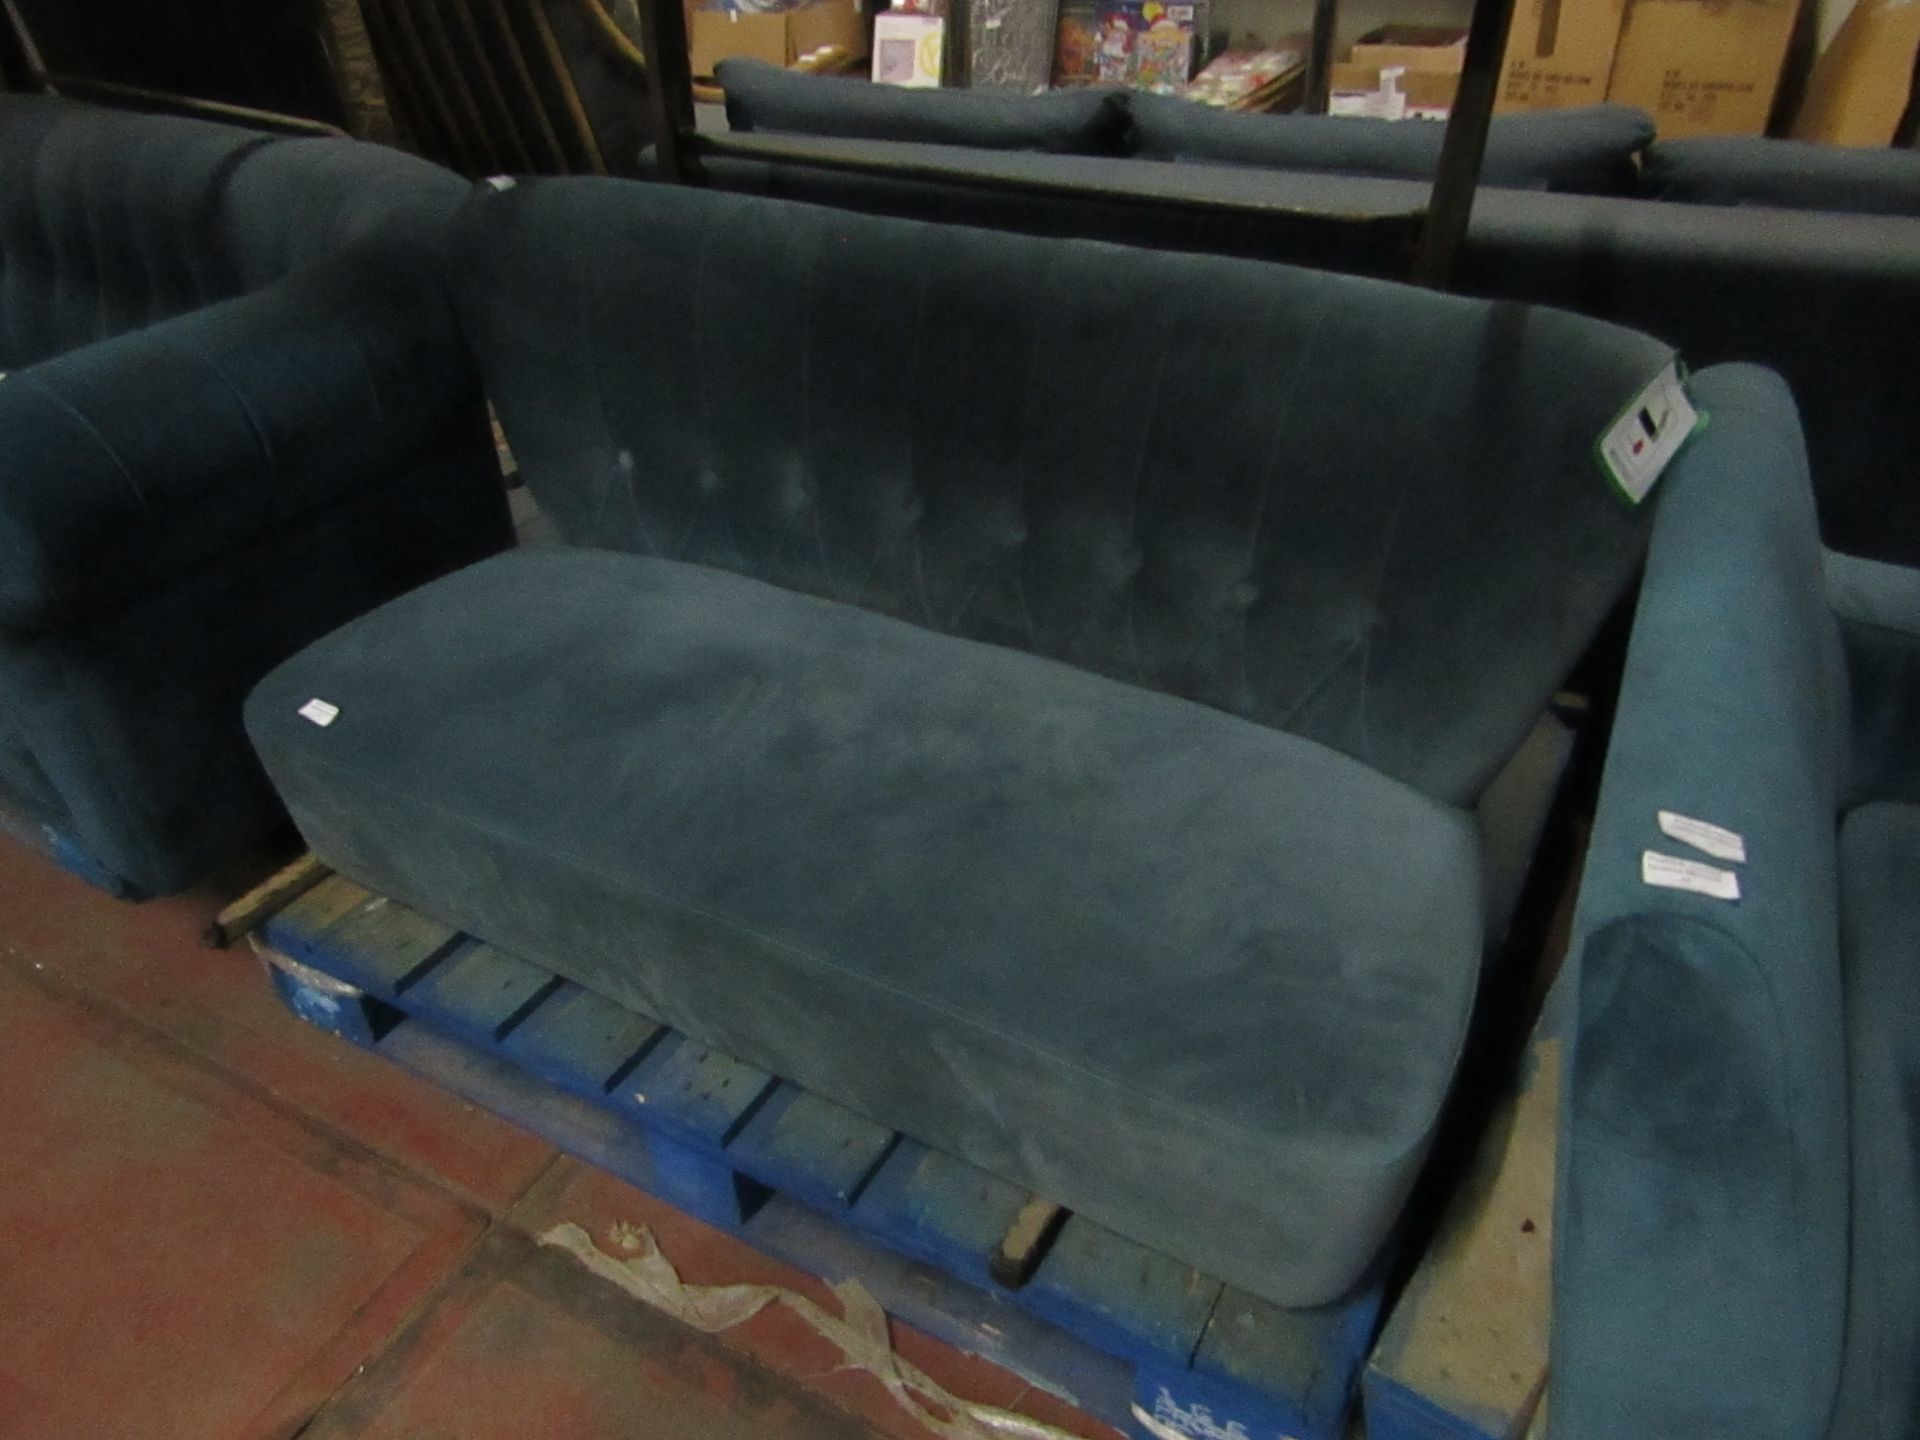 | 1X | MADE.COM CHARLEY 2 SEATER SOFA | GOOD CONDITION BUT MISSING LEGS | (THIS CONDITION REPORT